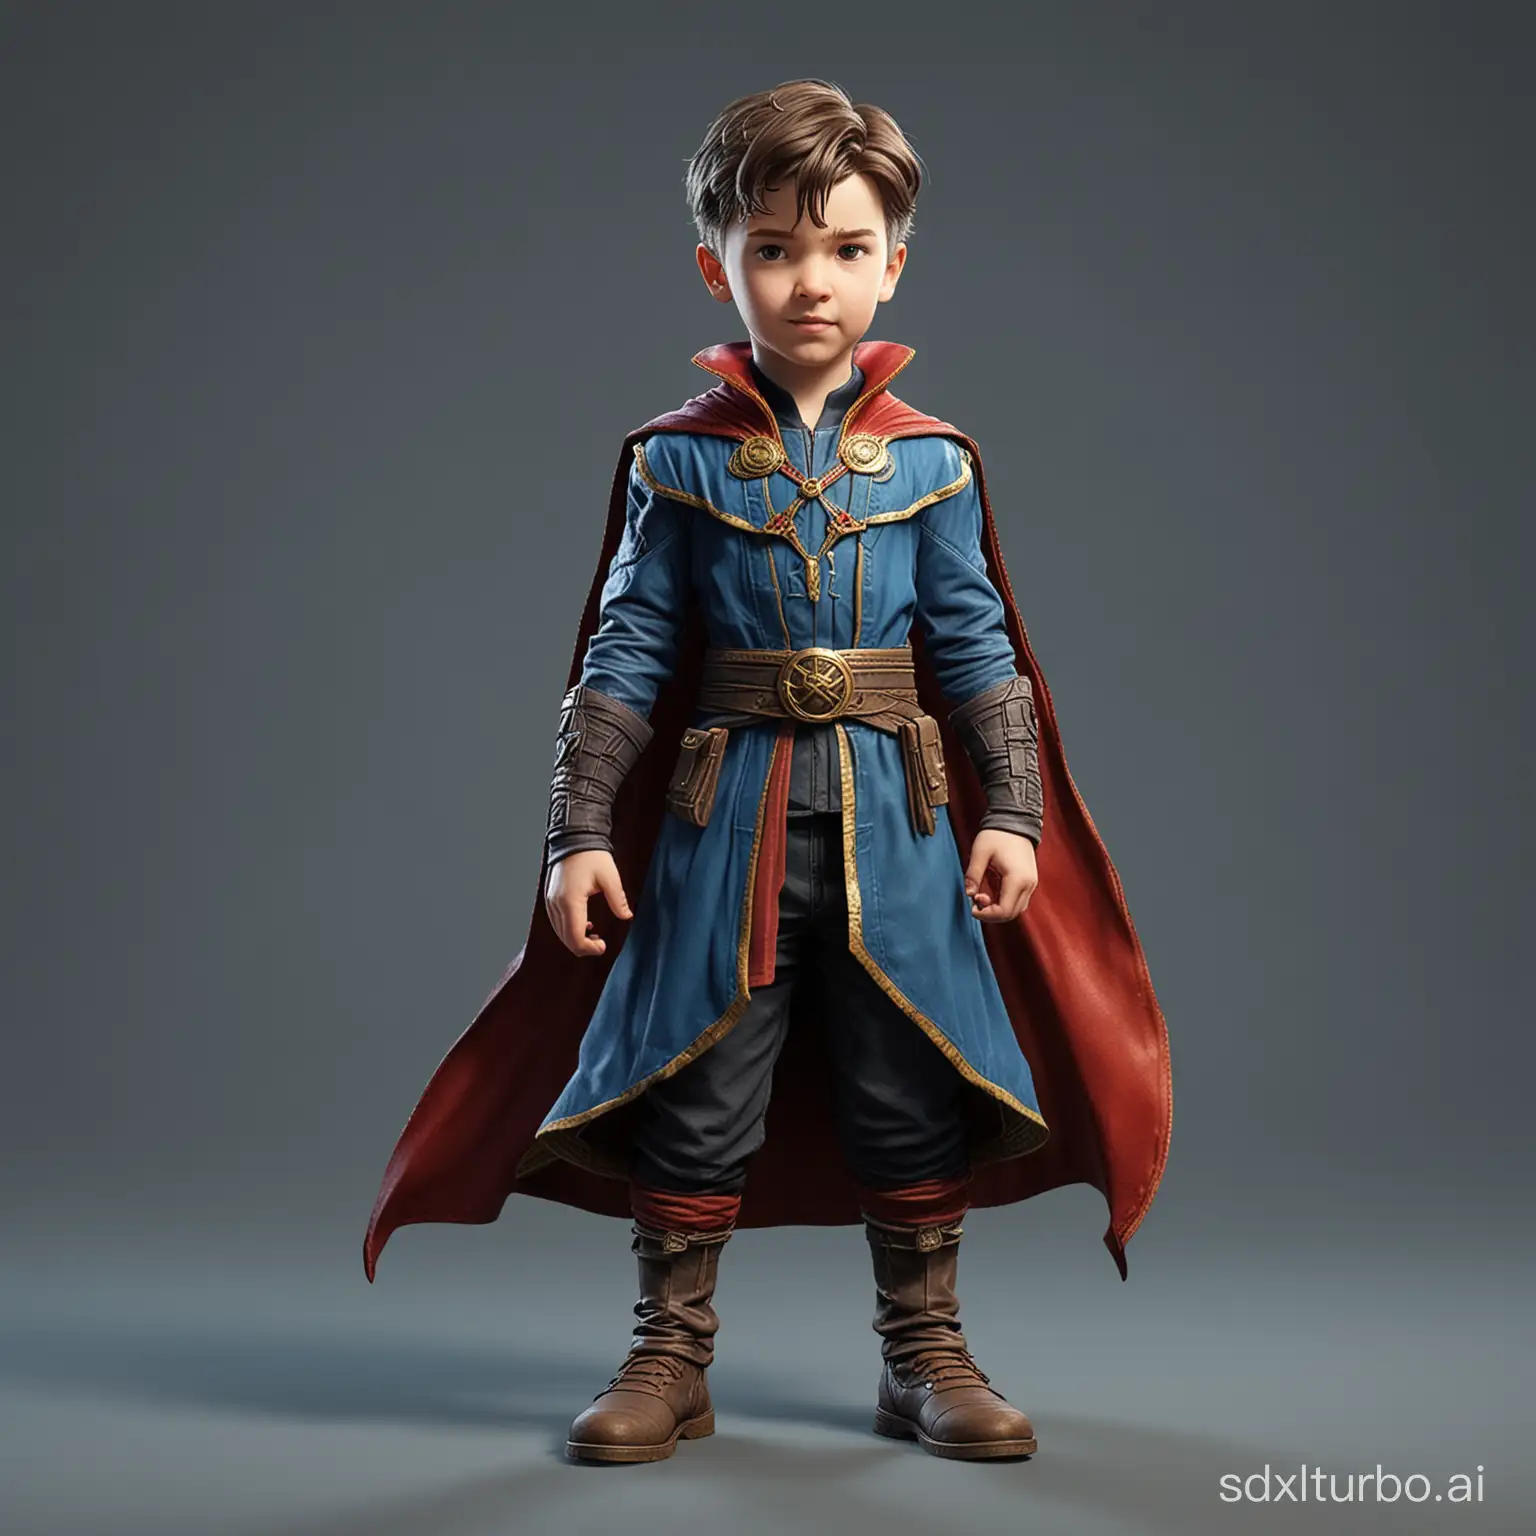 Little child Doctor Strange, game character, stands at full height